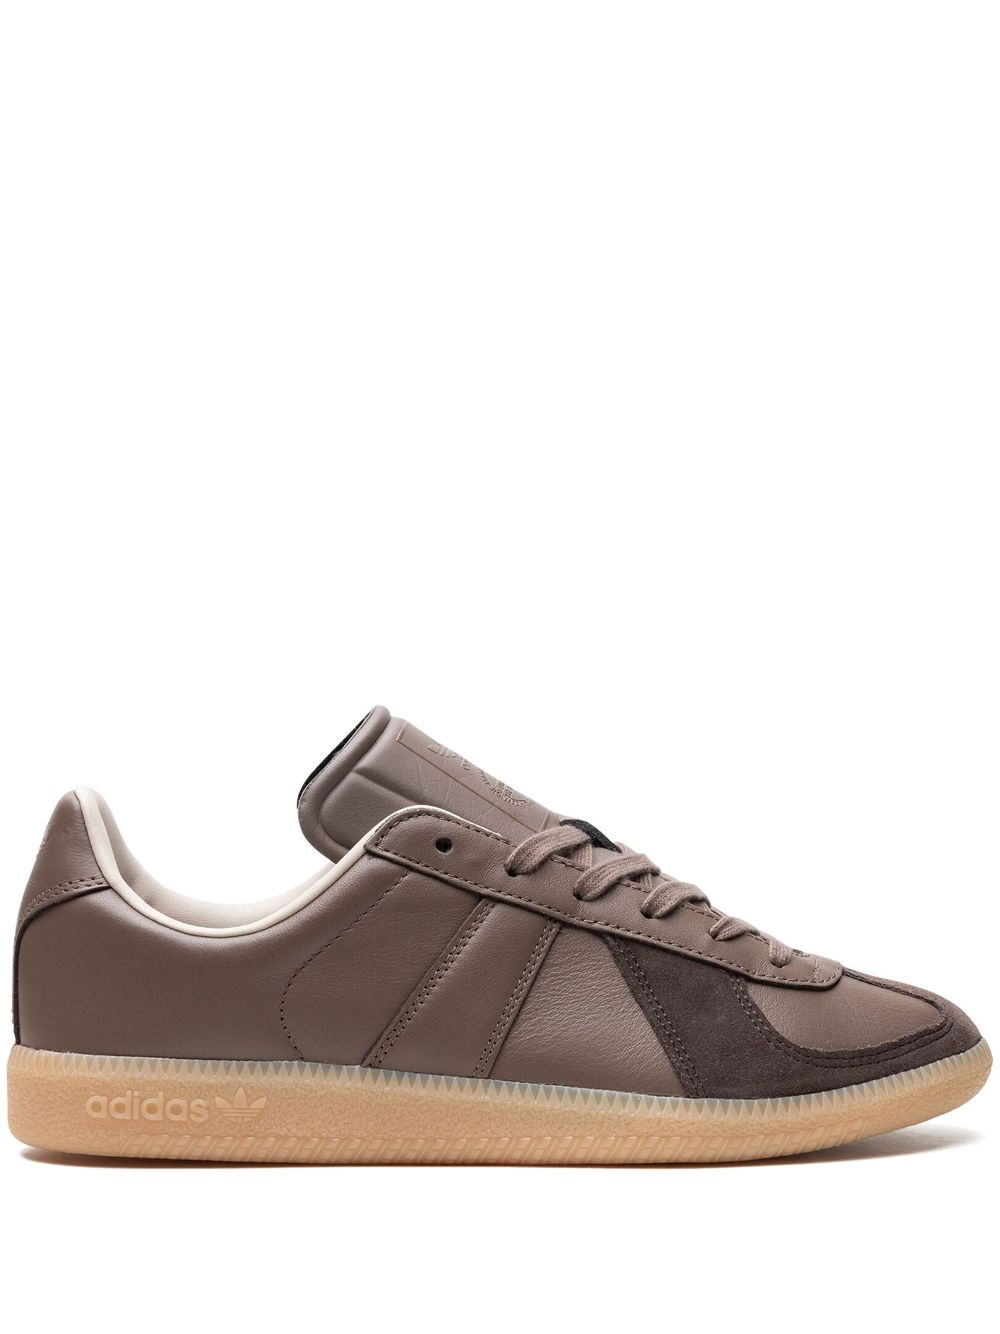 Adidas Originals X Size? Bw Army "brown/gum" Sneakers